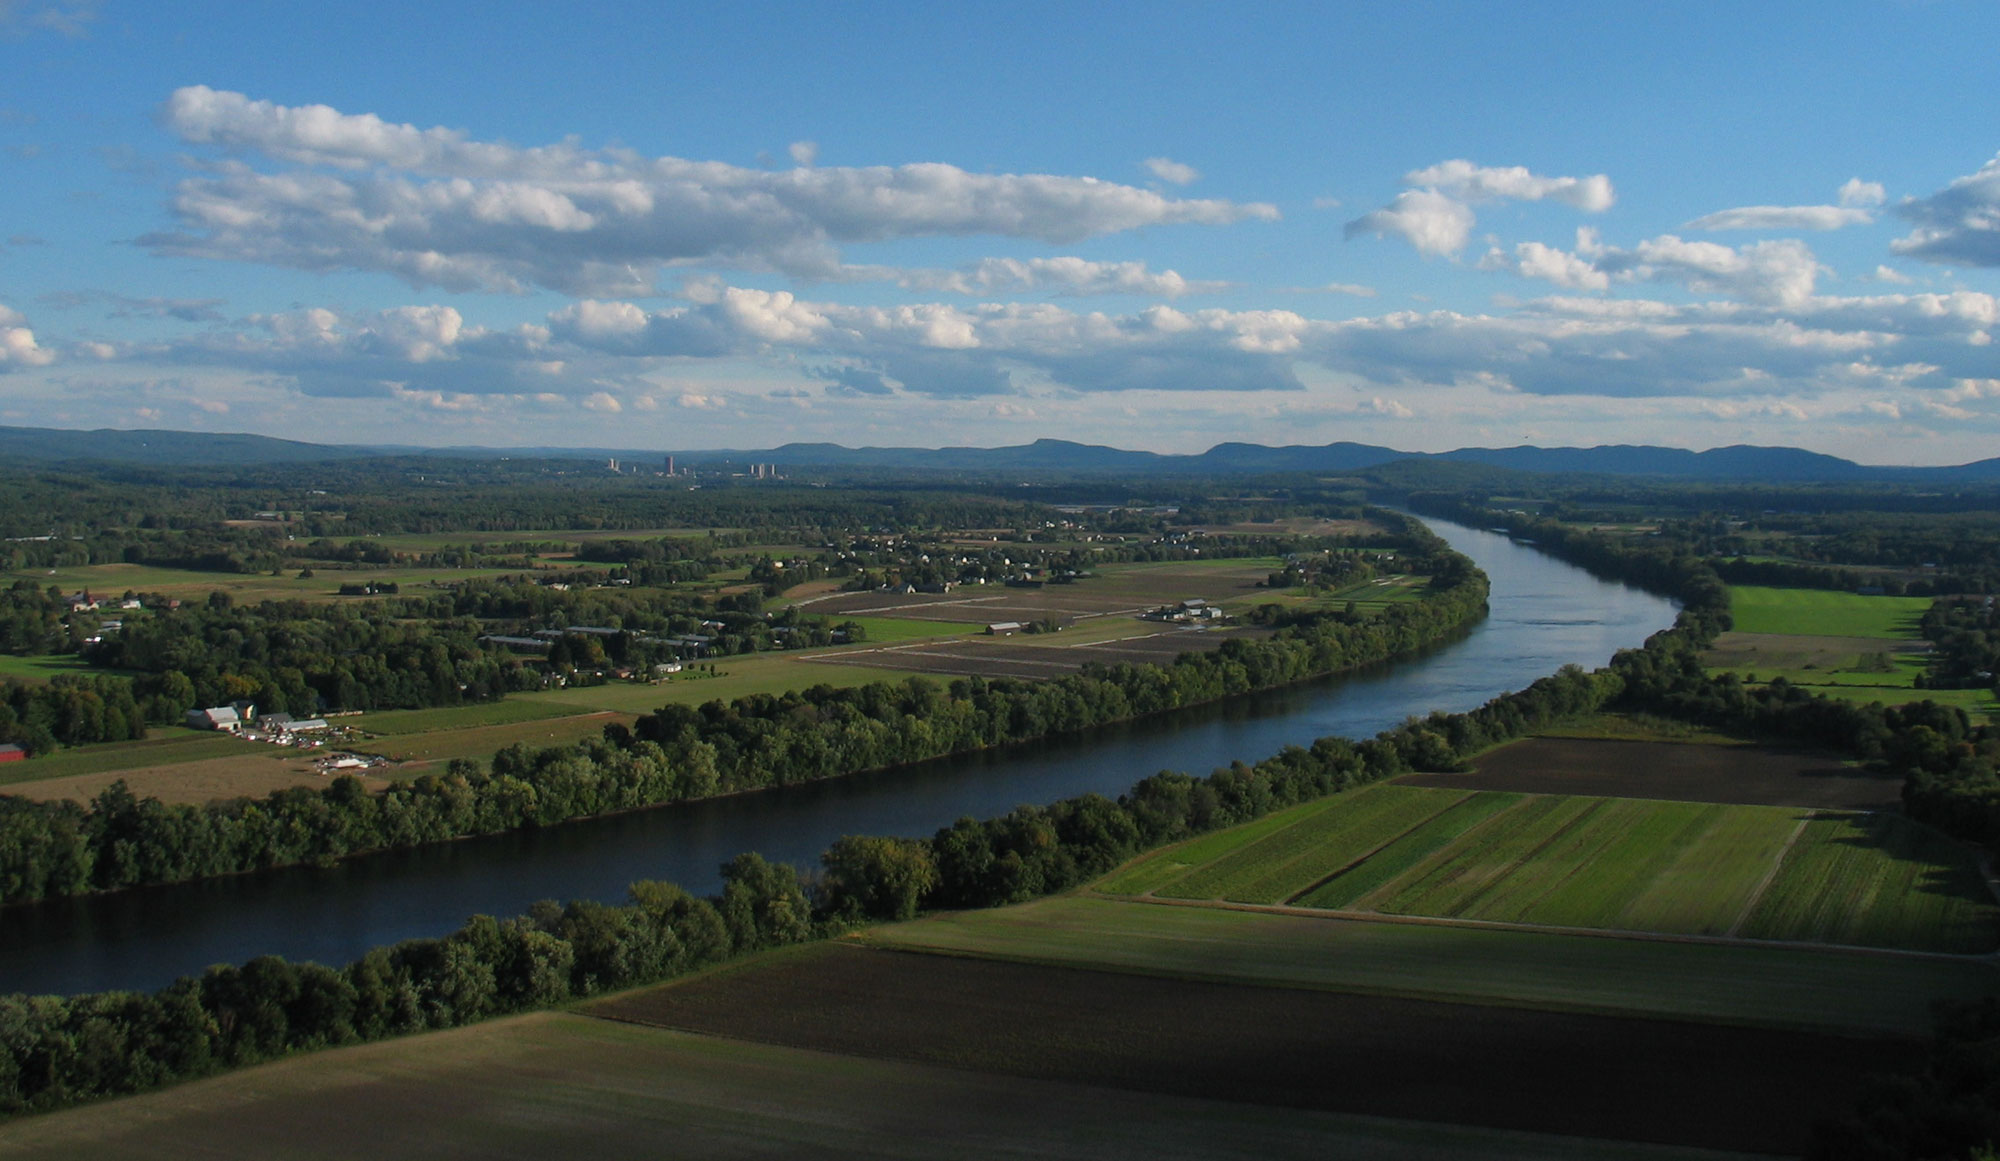 Photograph of the Connecticut River Valley (also known as Pioneer Valley) during the summer. The photo shows a river beginning at the lower left of the image and proceeding diagonally upwards and to the right, bending near the right side of the image and proceeding toward the horizon. The area on either side of the river is flat with patches of forest and agricultural fields. The Holyoke Mountains rise in the far distance.